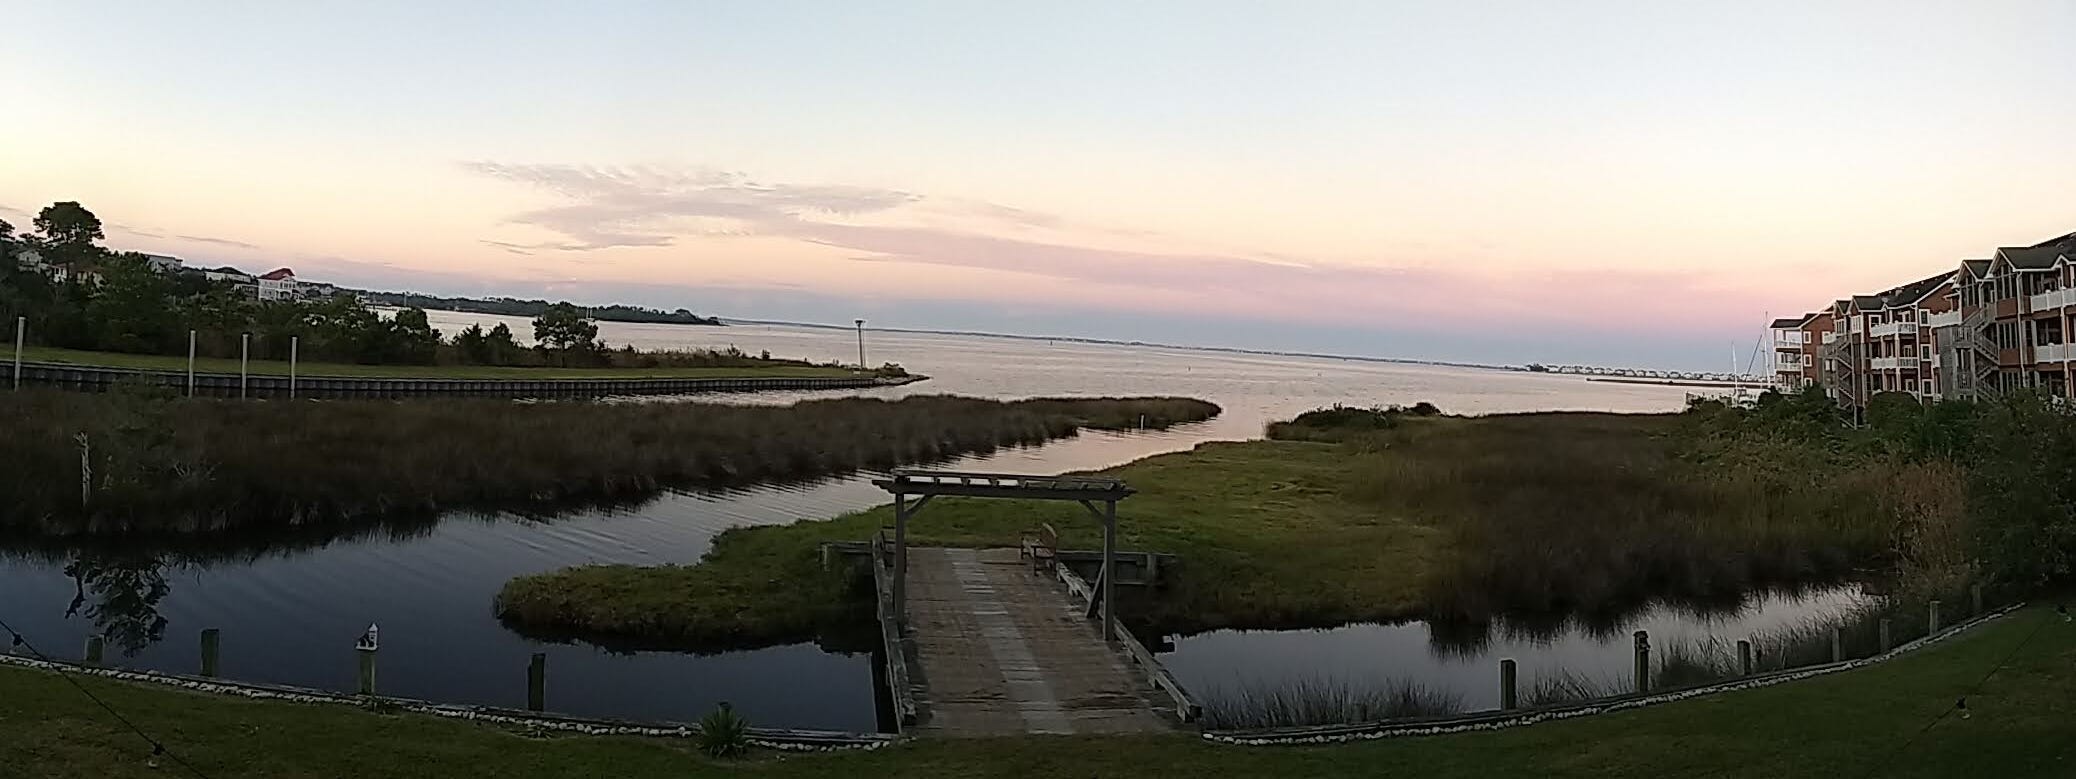 A panoramic photo overlooking the water from Manteo, Roanoke island, NC.